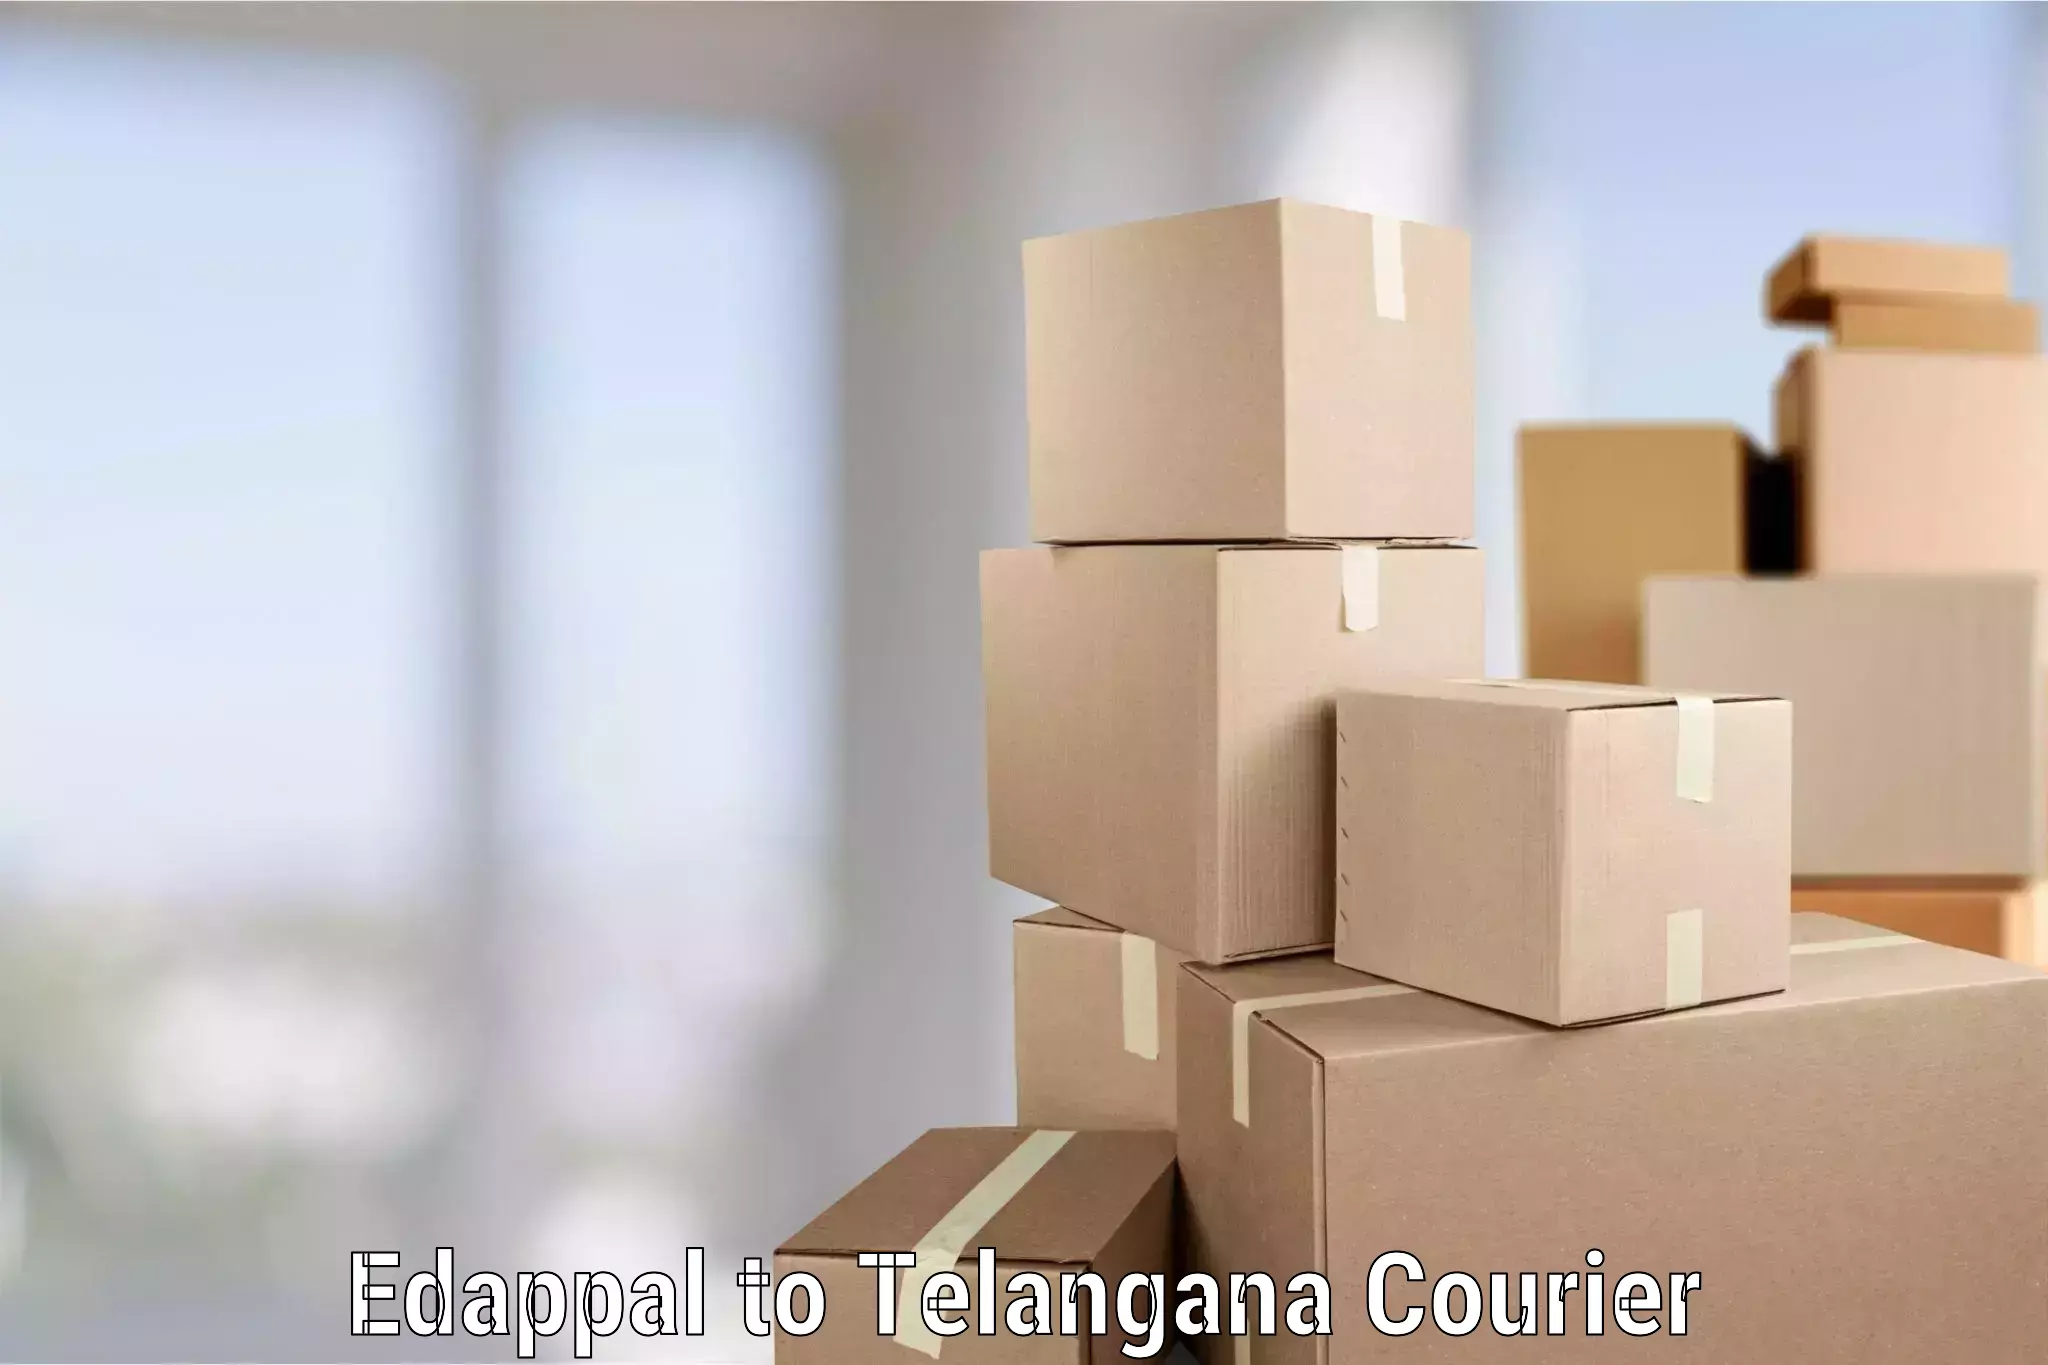 Trusted relocation experts Edappal to Yellareddy